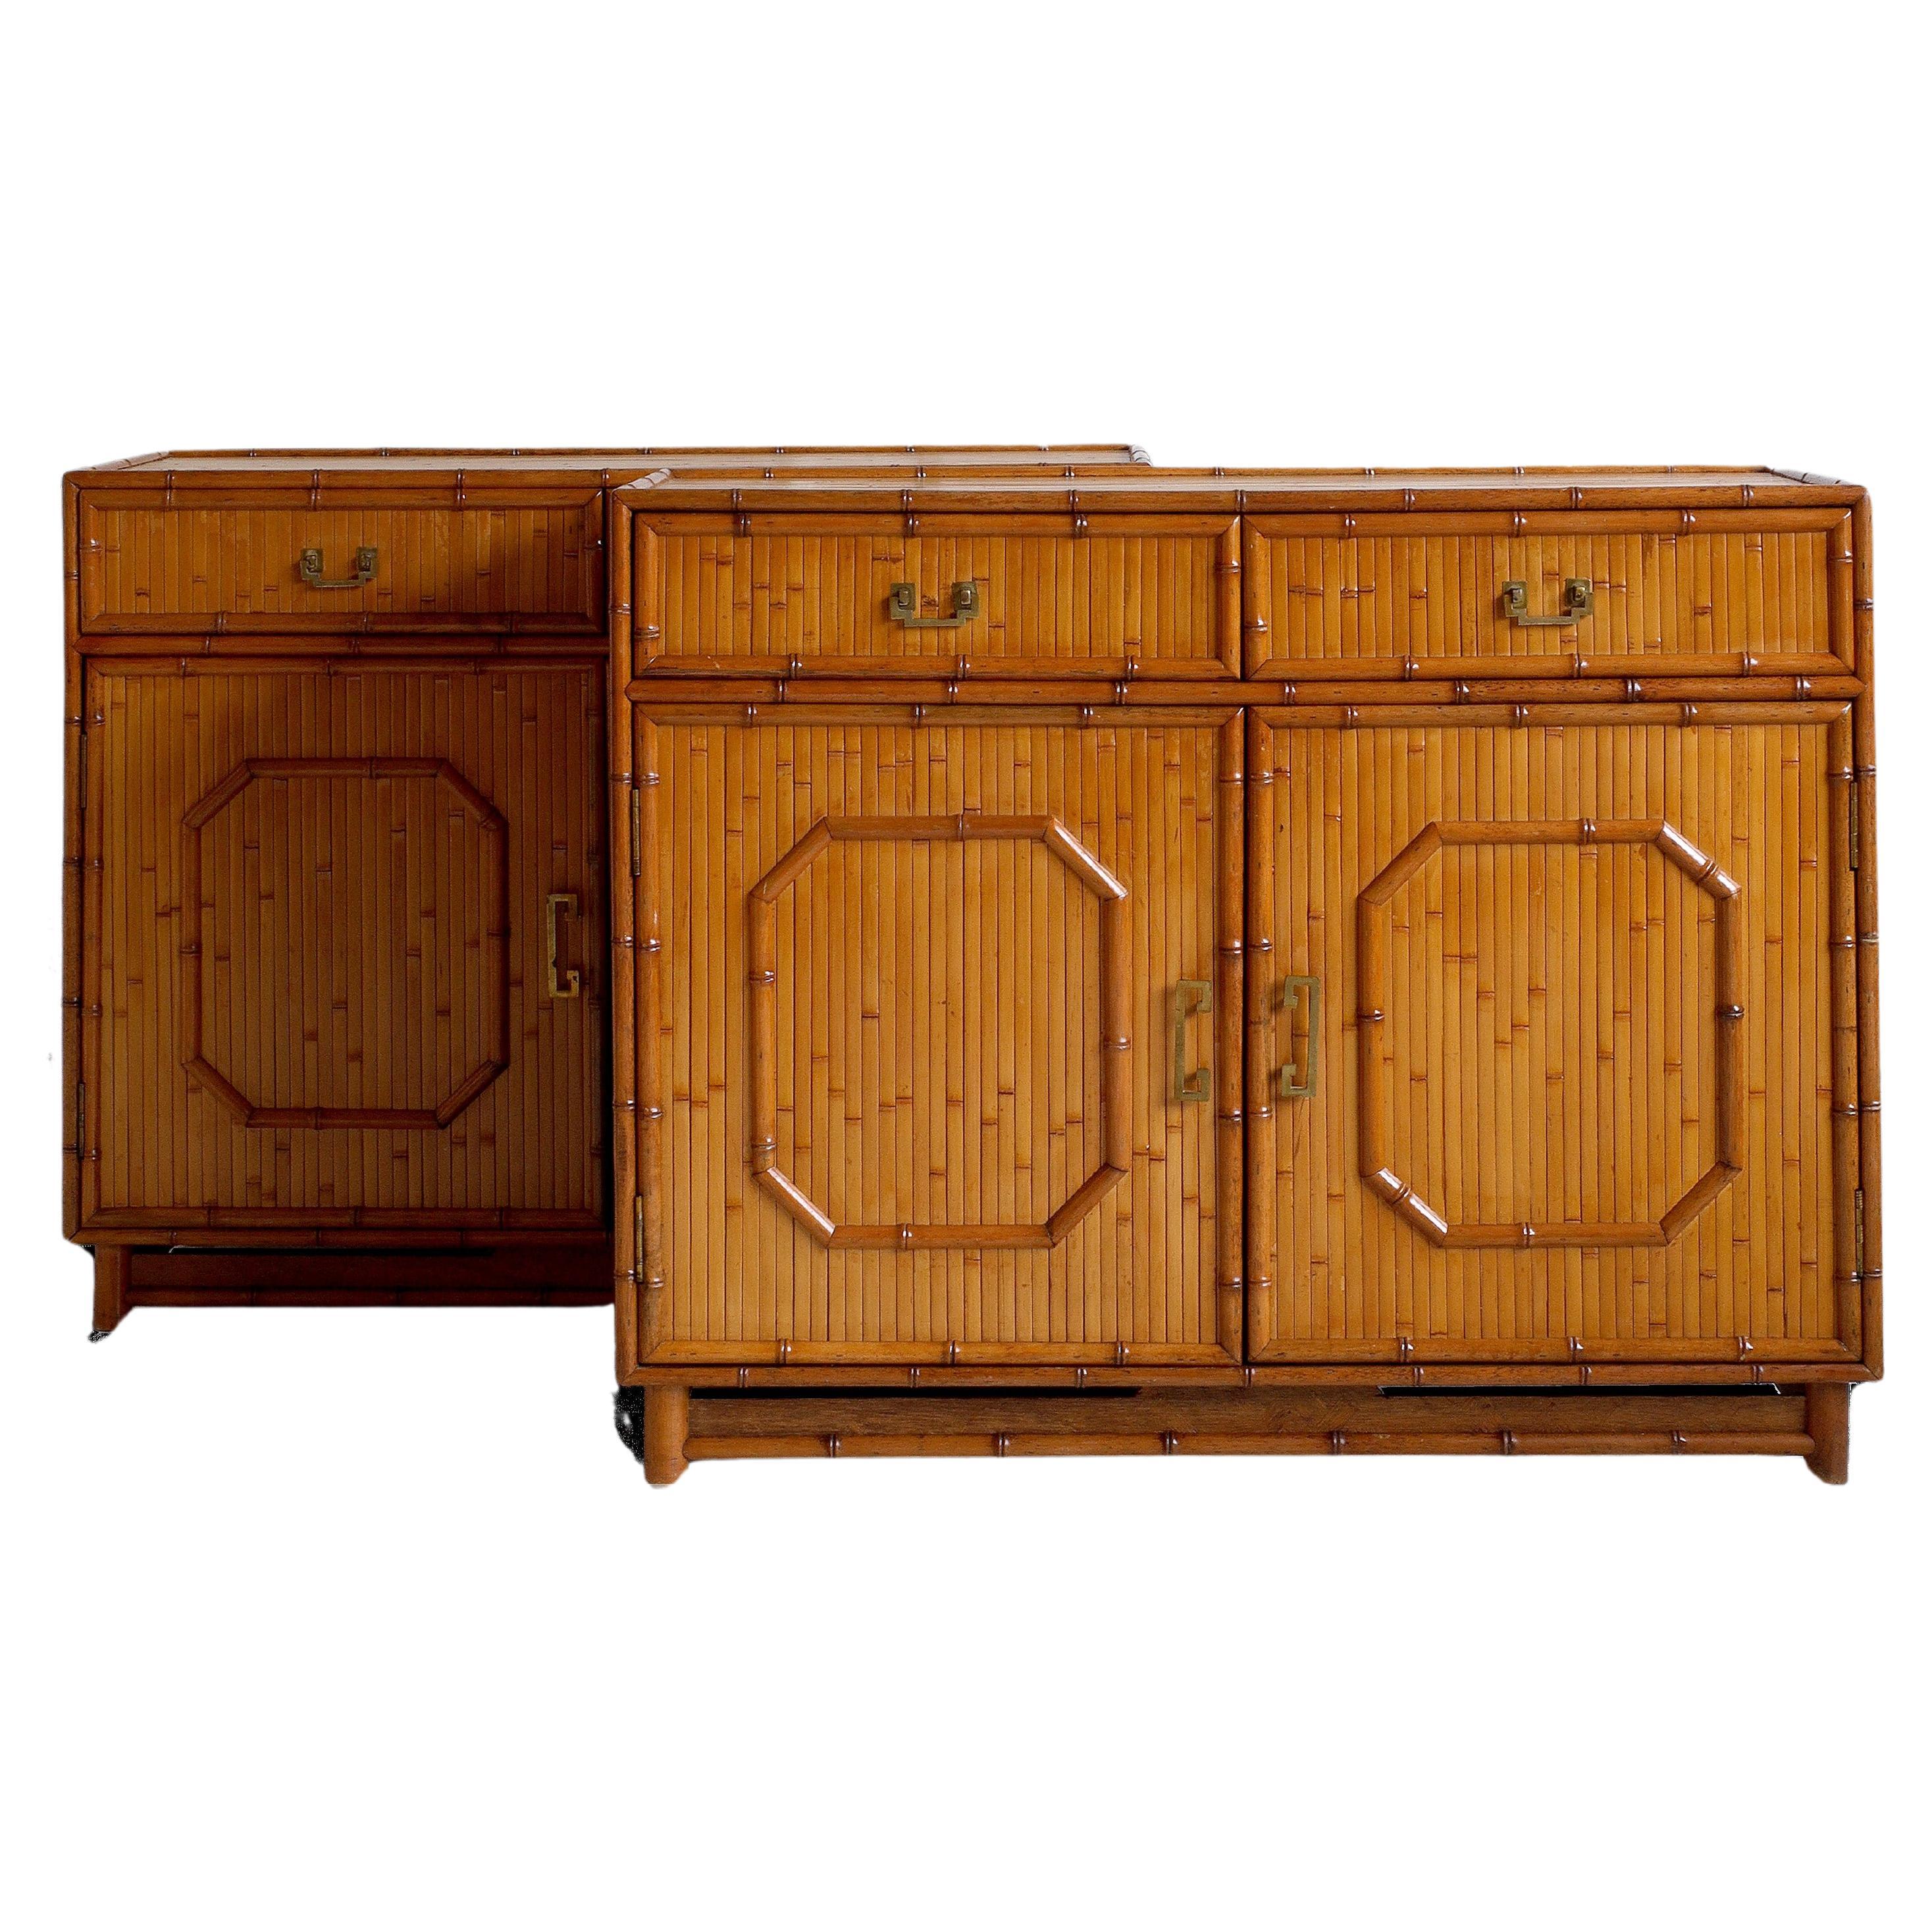 Pair of Vintage Italian Bamboo and Rattan Sideboards